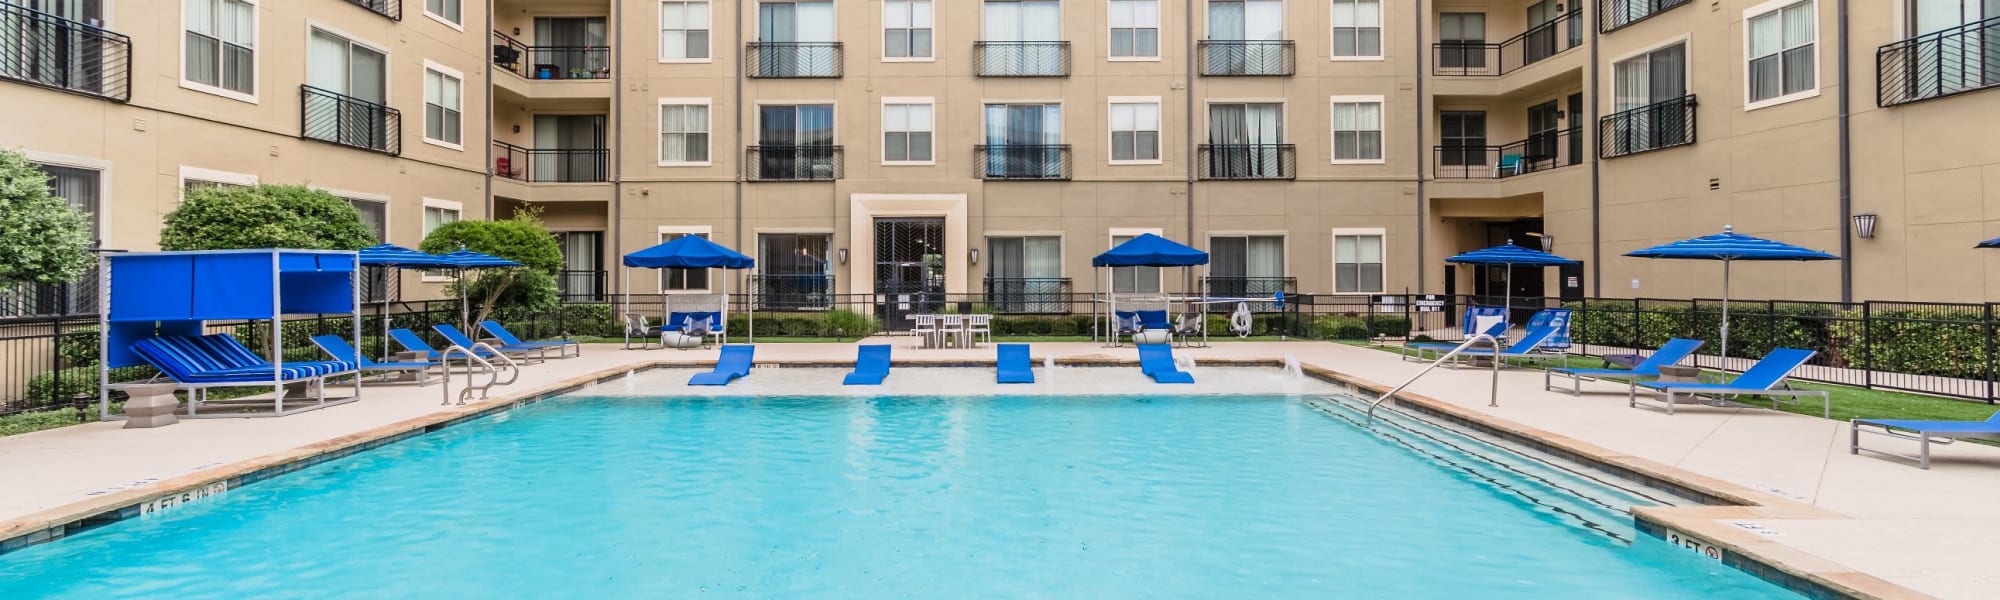 Resident resources at Olympus Boulevard in Frisco, Texas